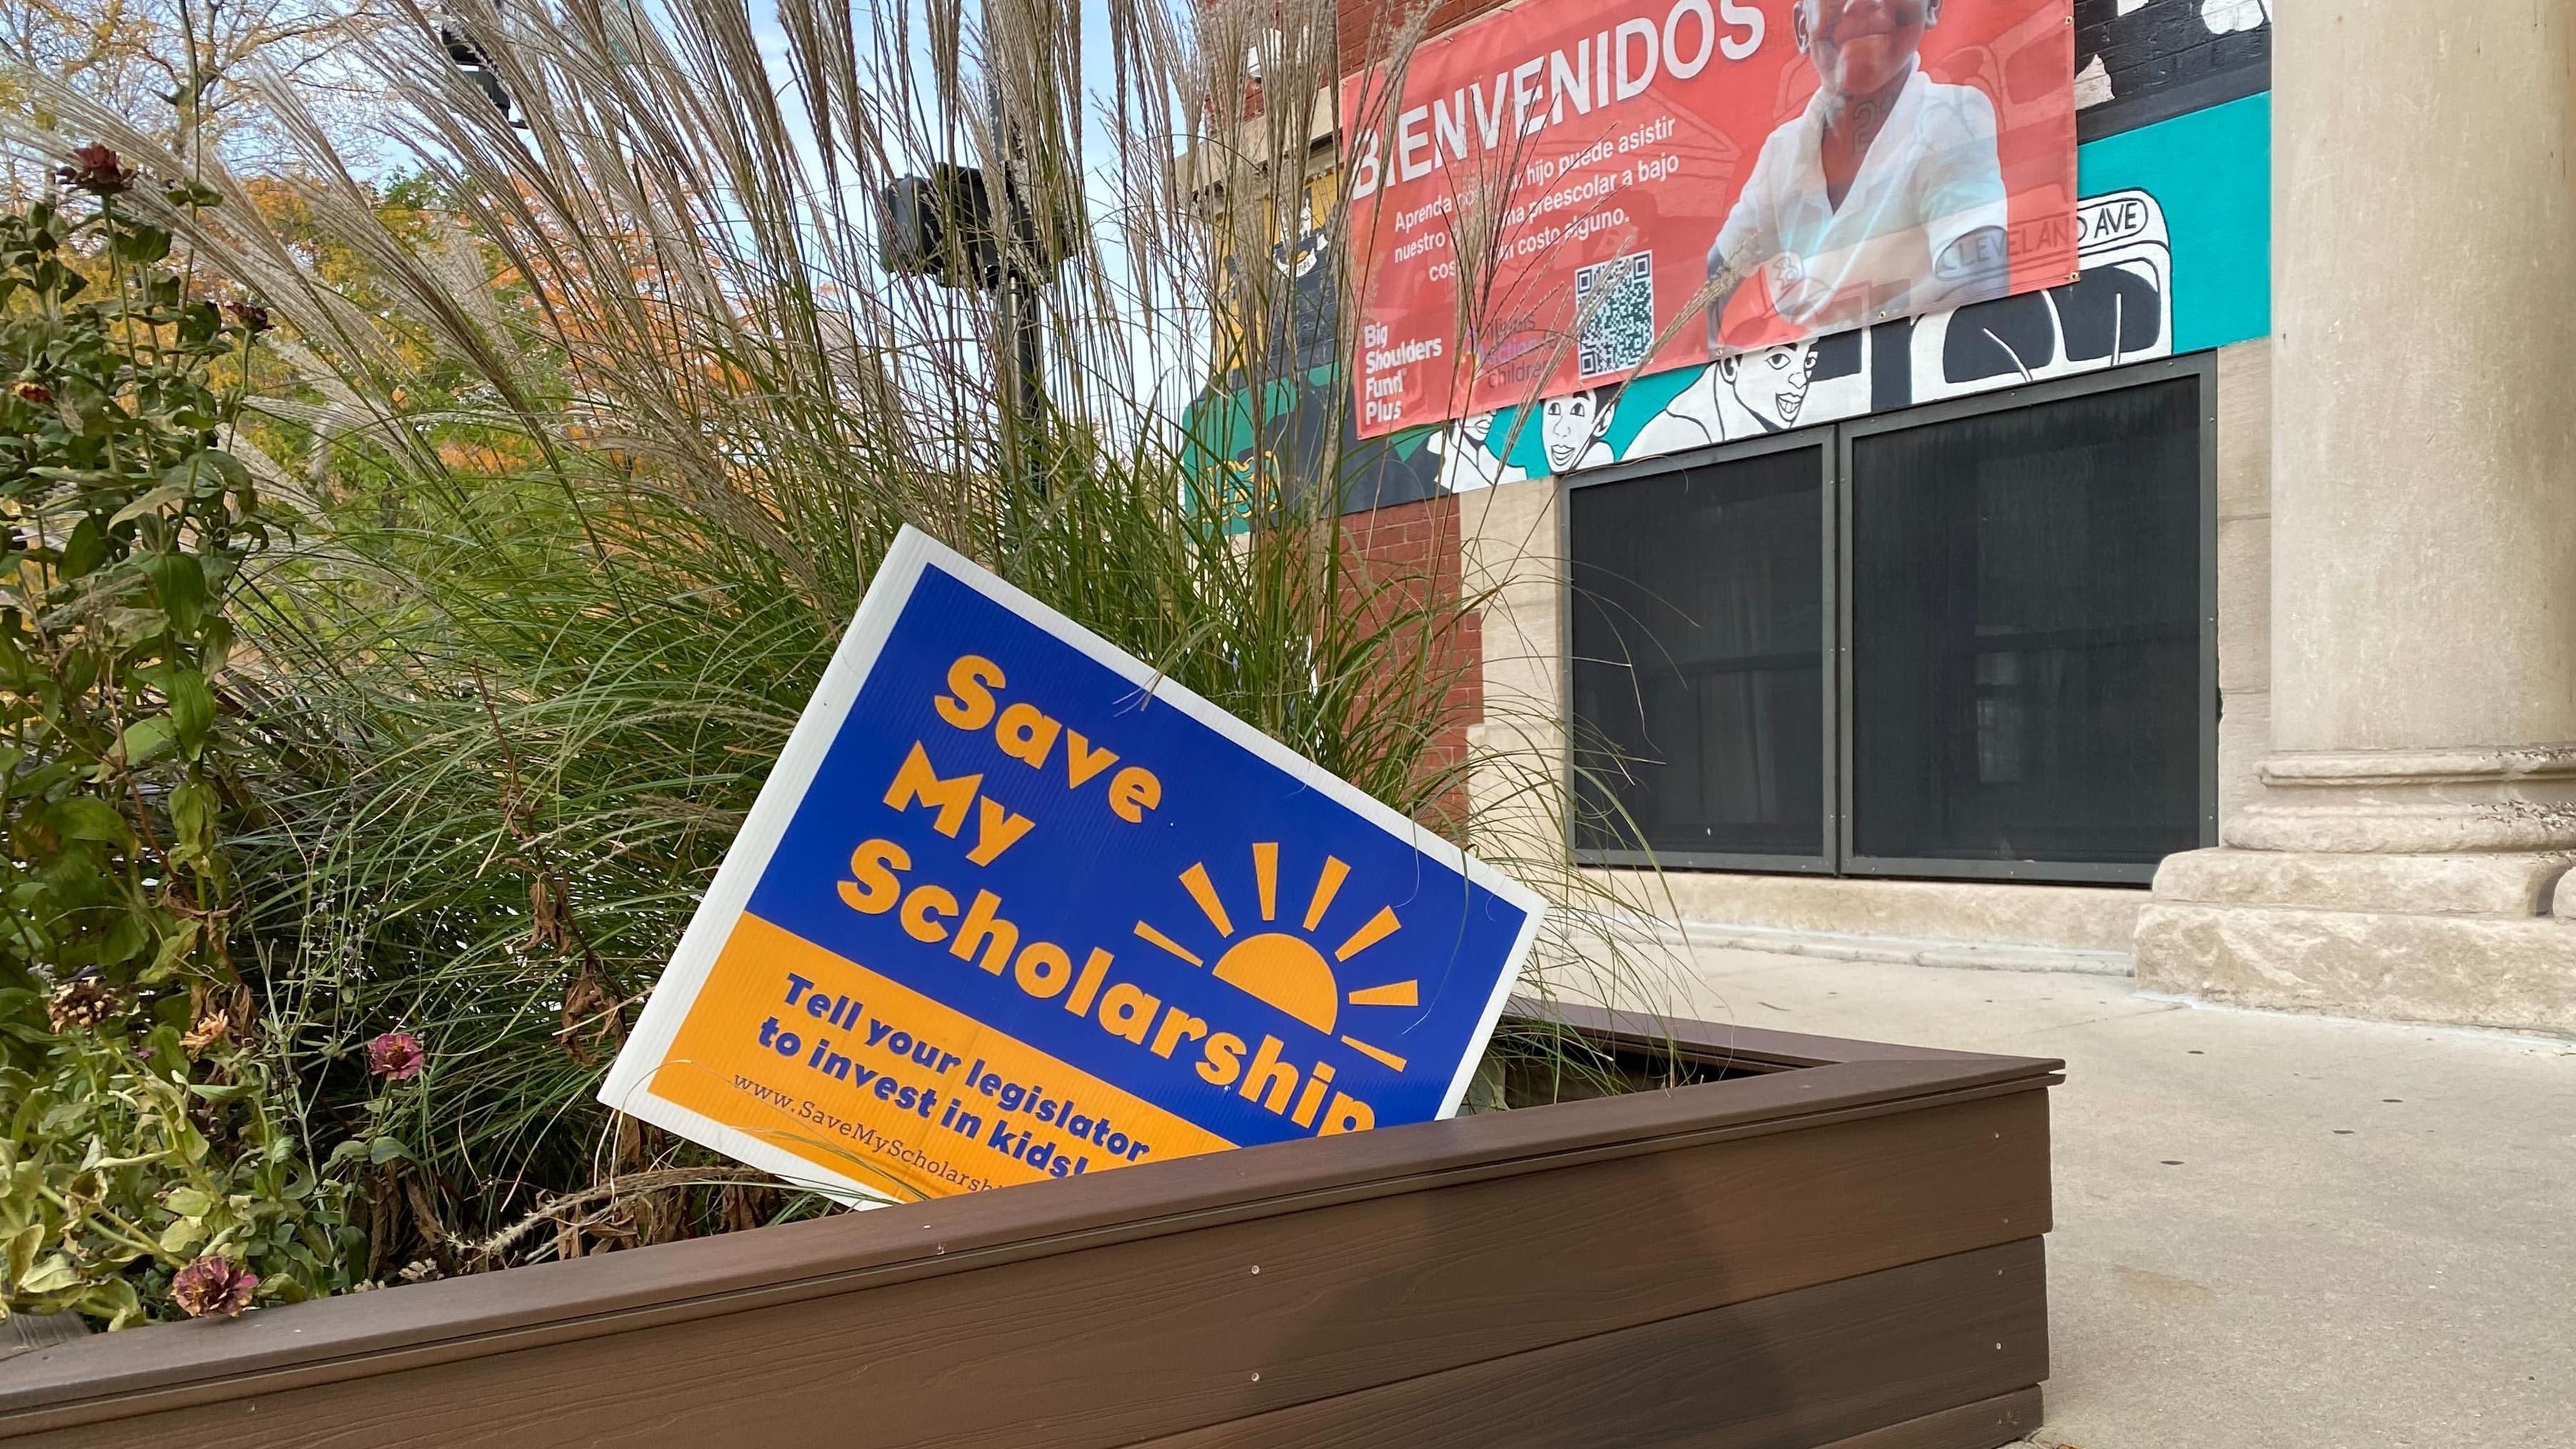 A blue and yellow sign that reads" save my scholarship" sits in a flower bed in front of a school building.